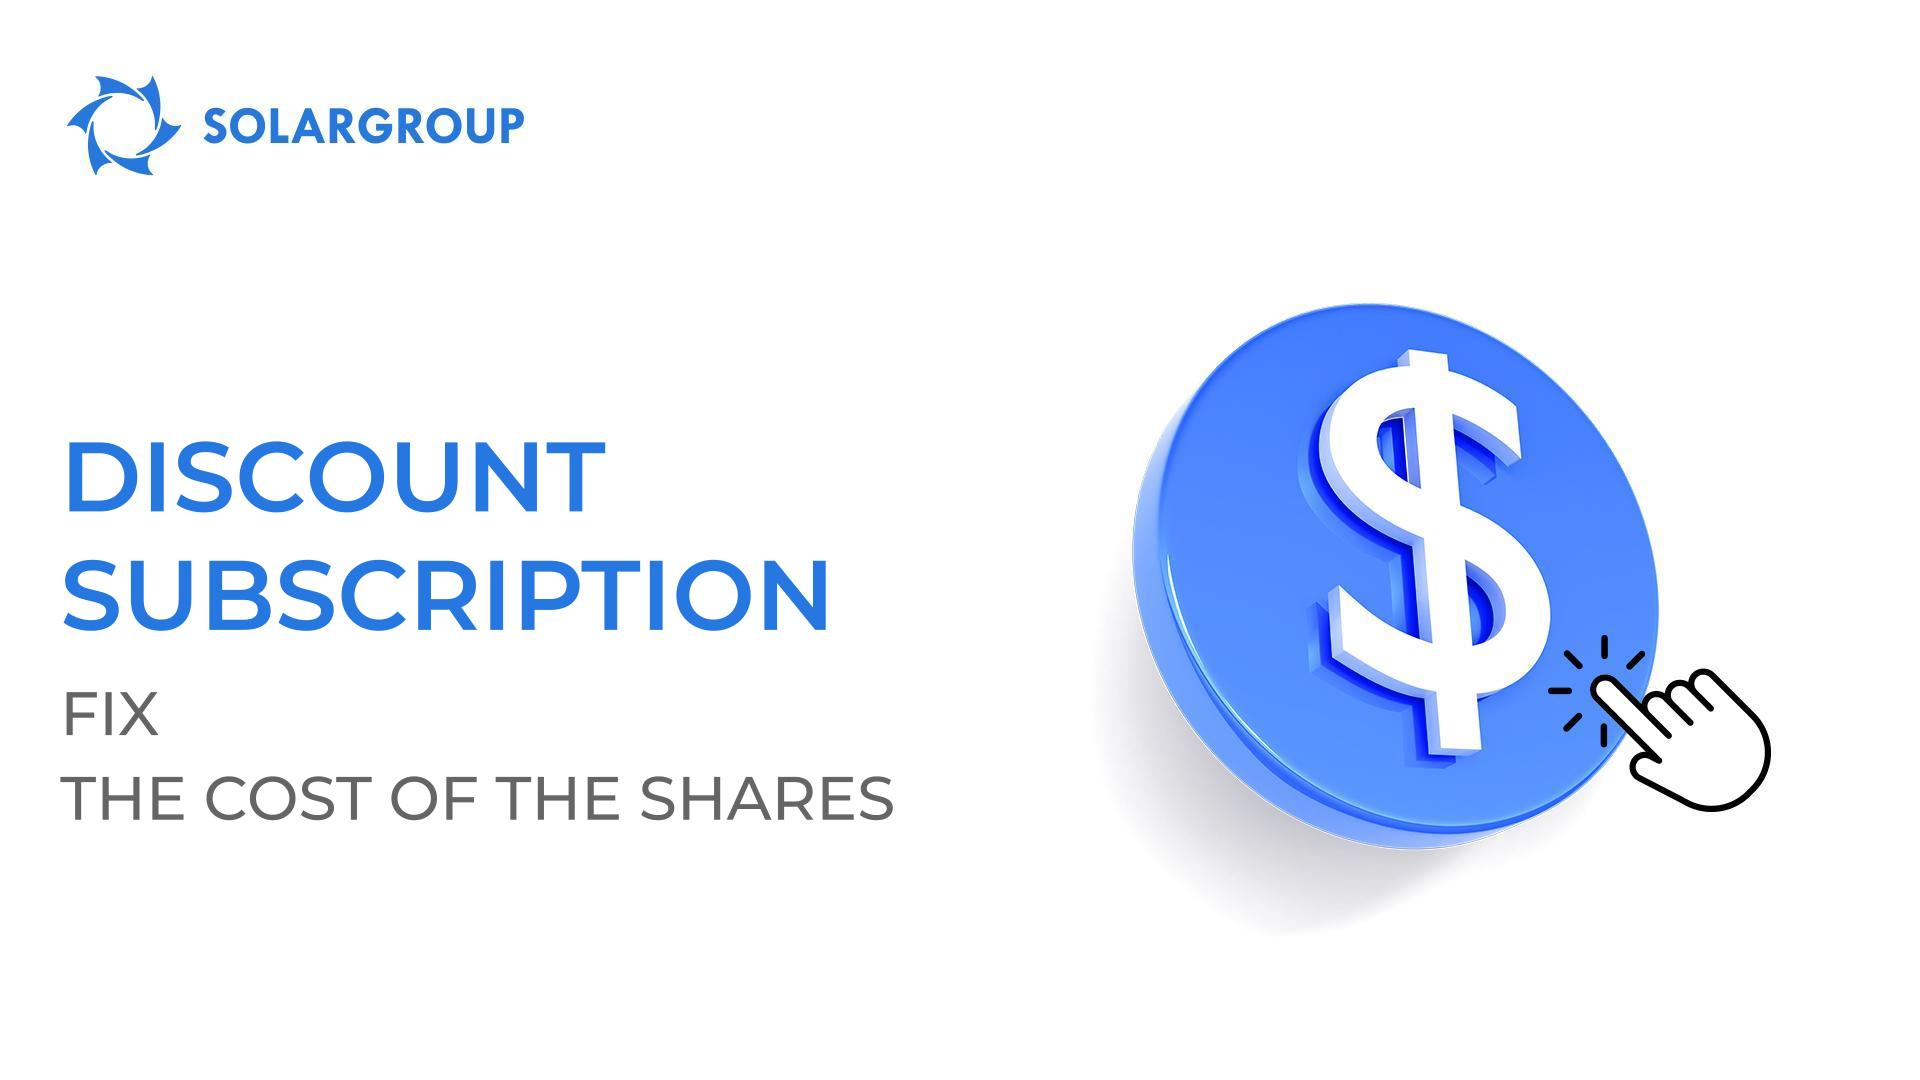 The way to buy shares without their cost going up: discount subscription